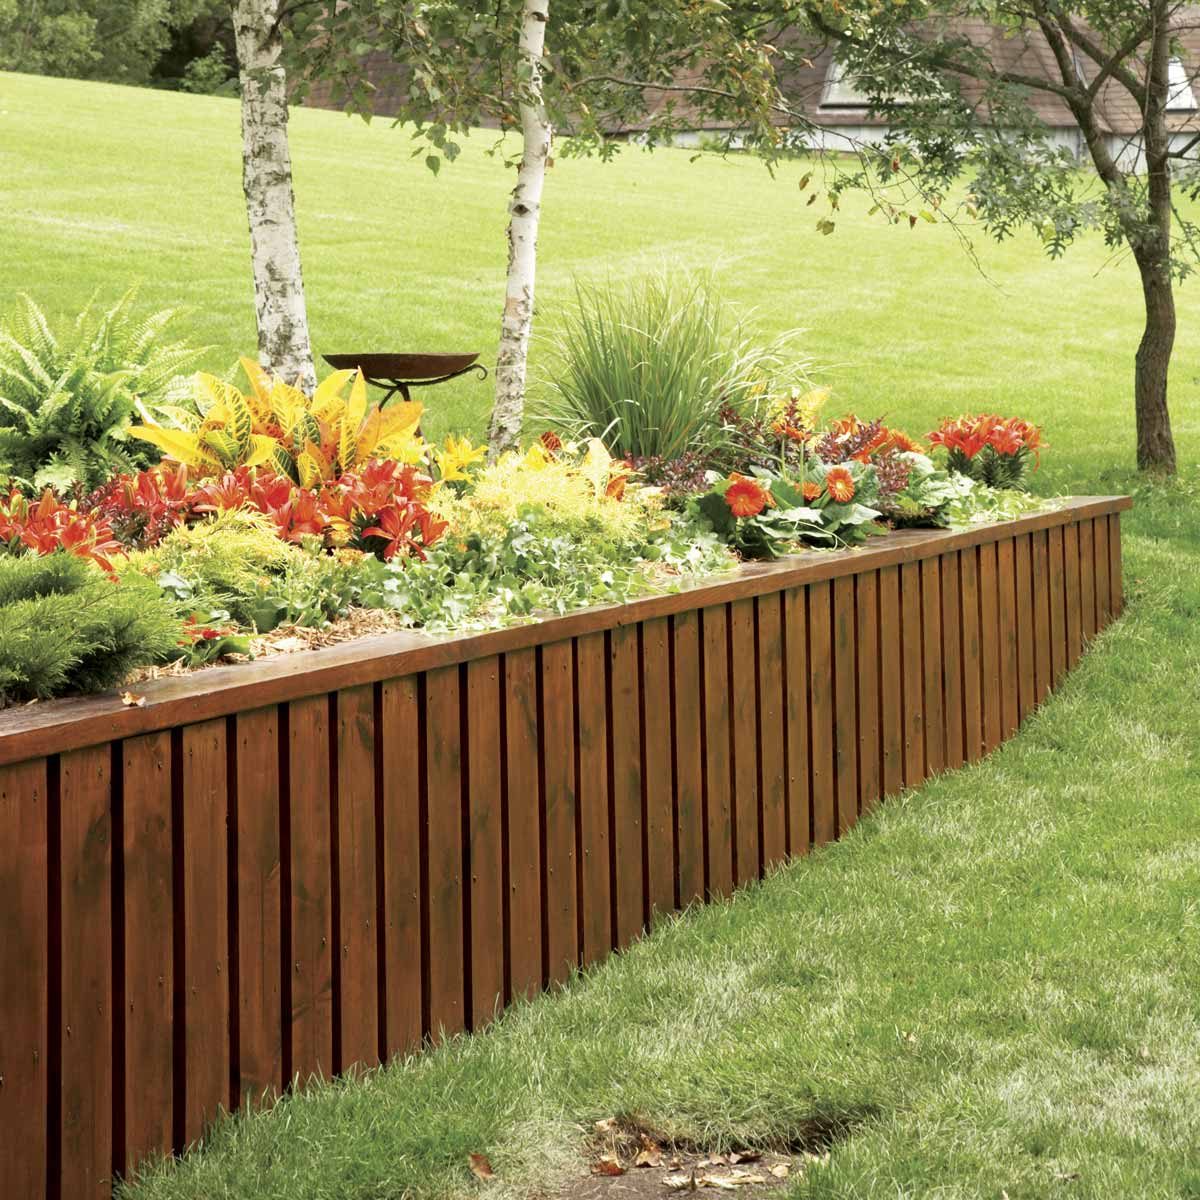 How To Build A Retaining Wall Diy, Landscaping Block Ideas